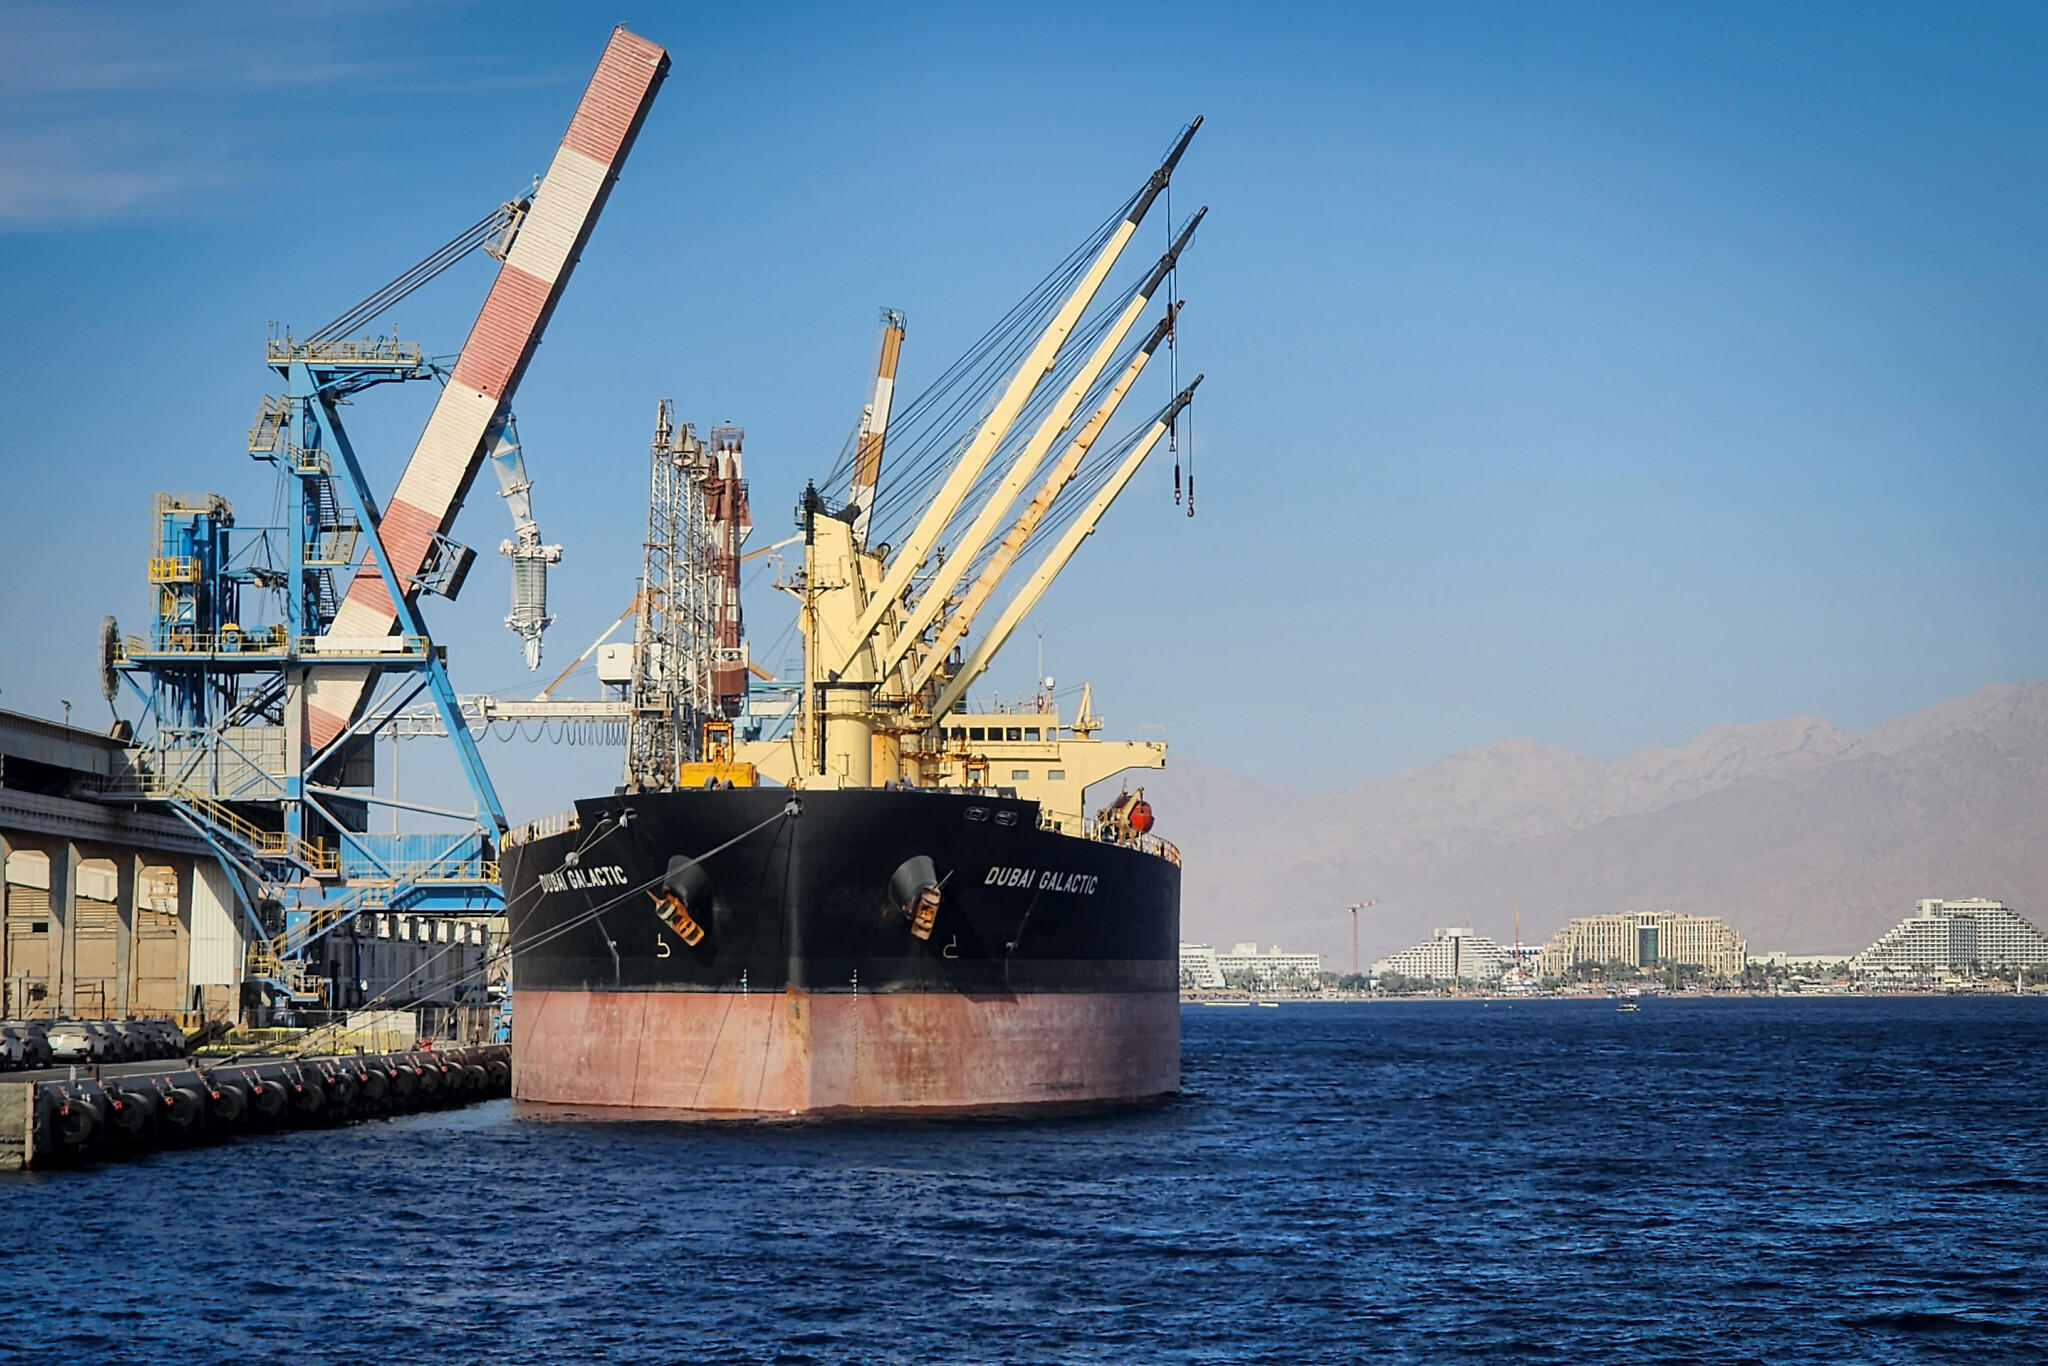 Eilat Port to lay off half its staff due to Houthi attacks stymieing shipping trade